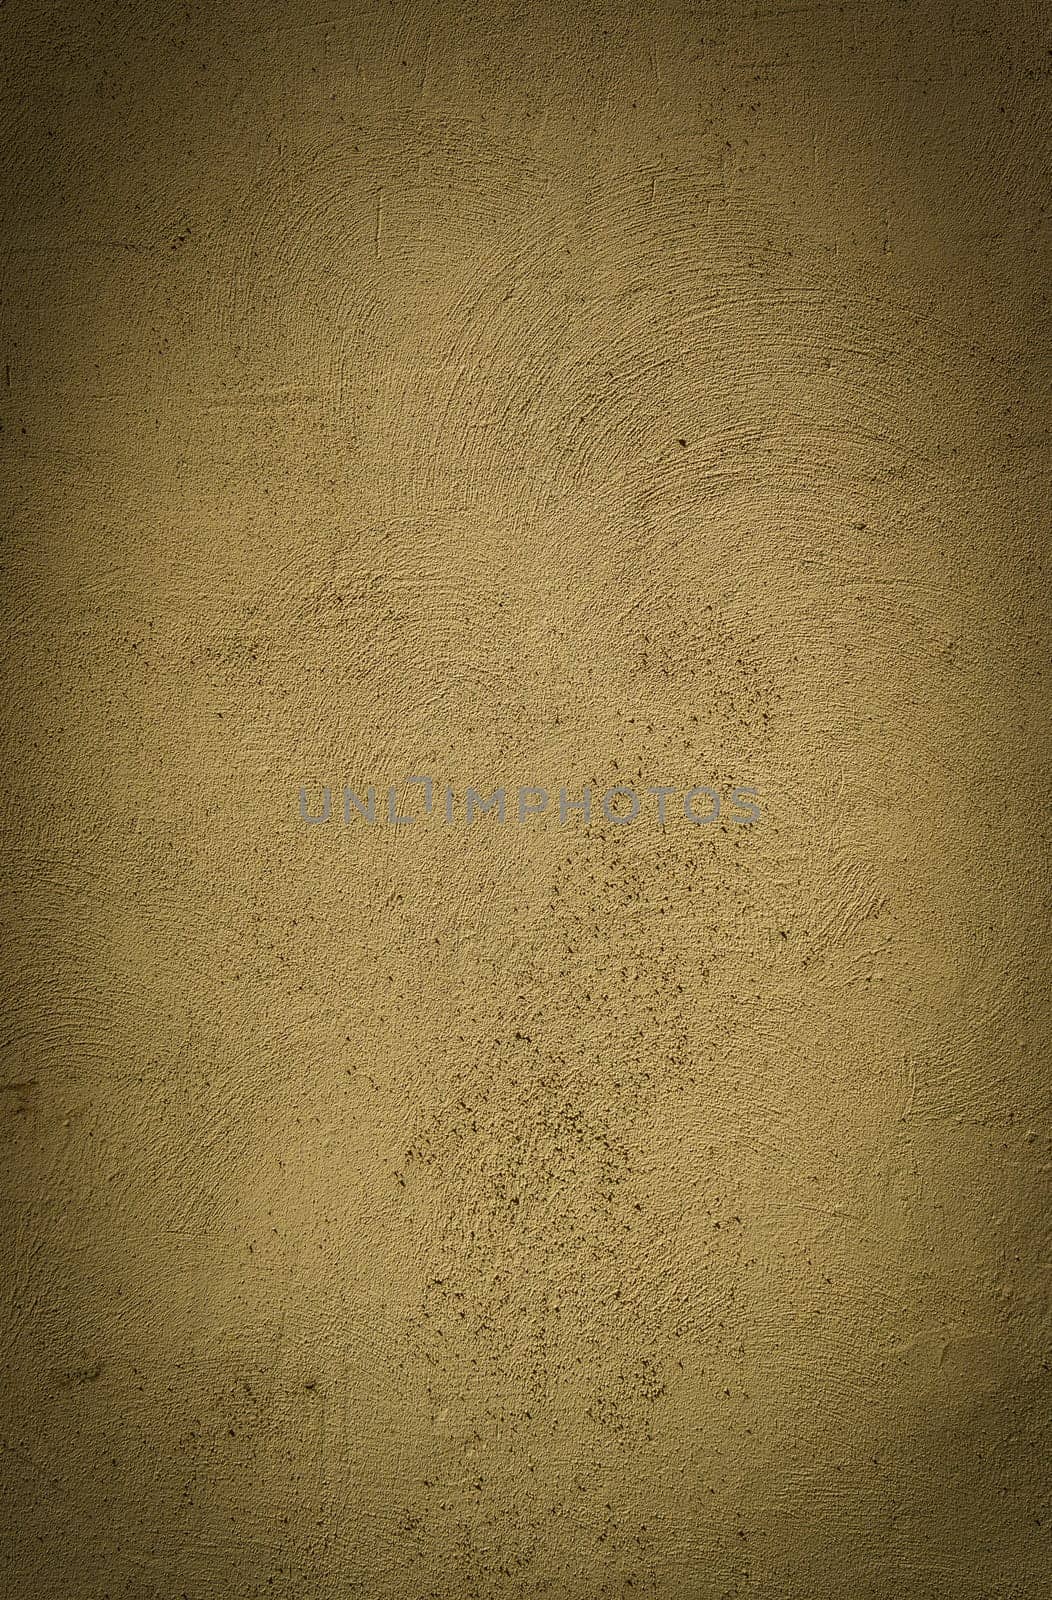 Old stucco plaster yellow painted wall abstract background texture photo 1